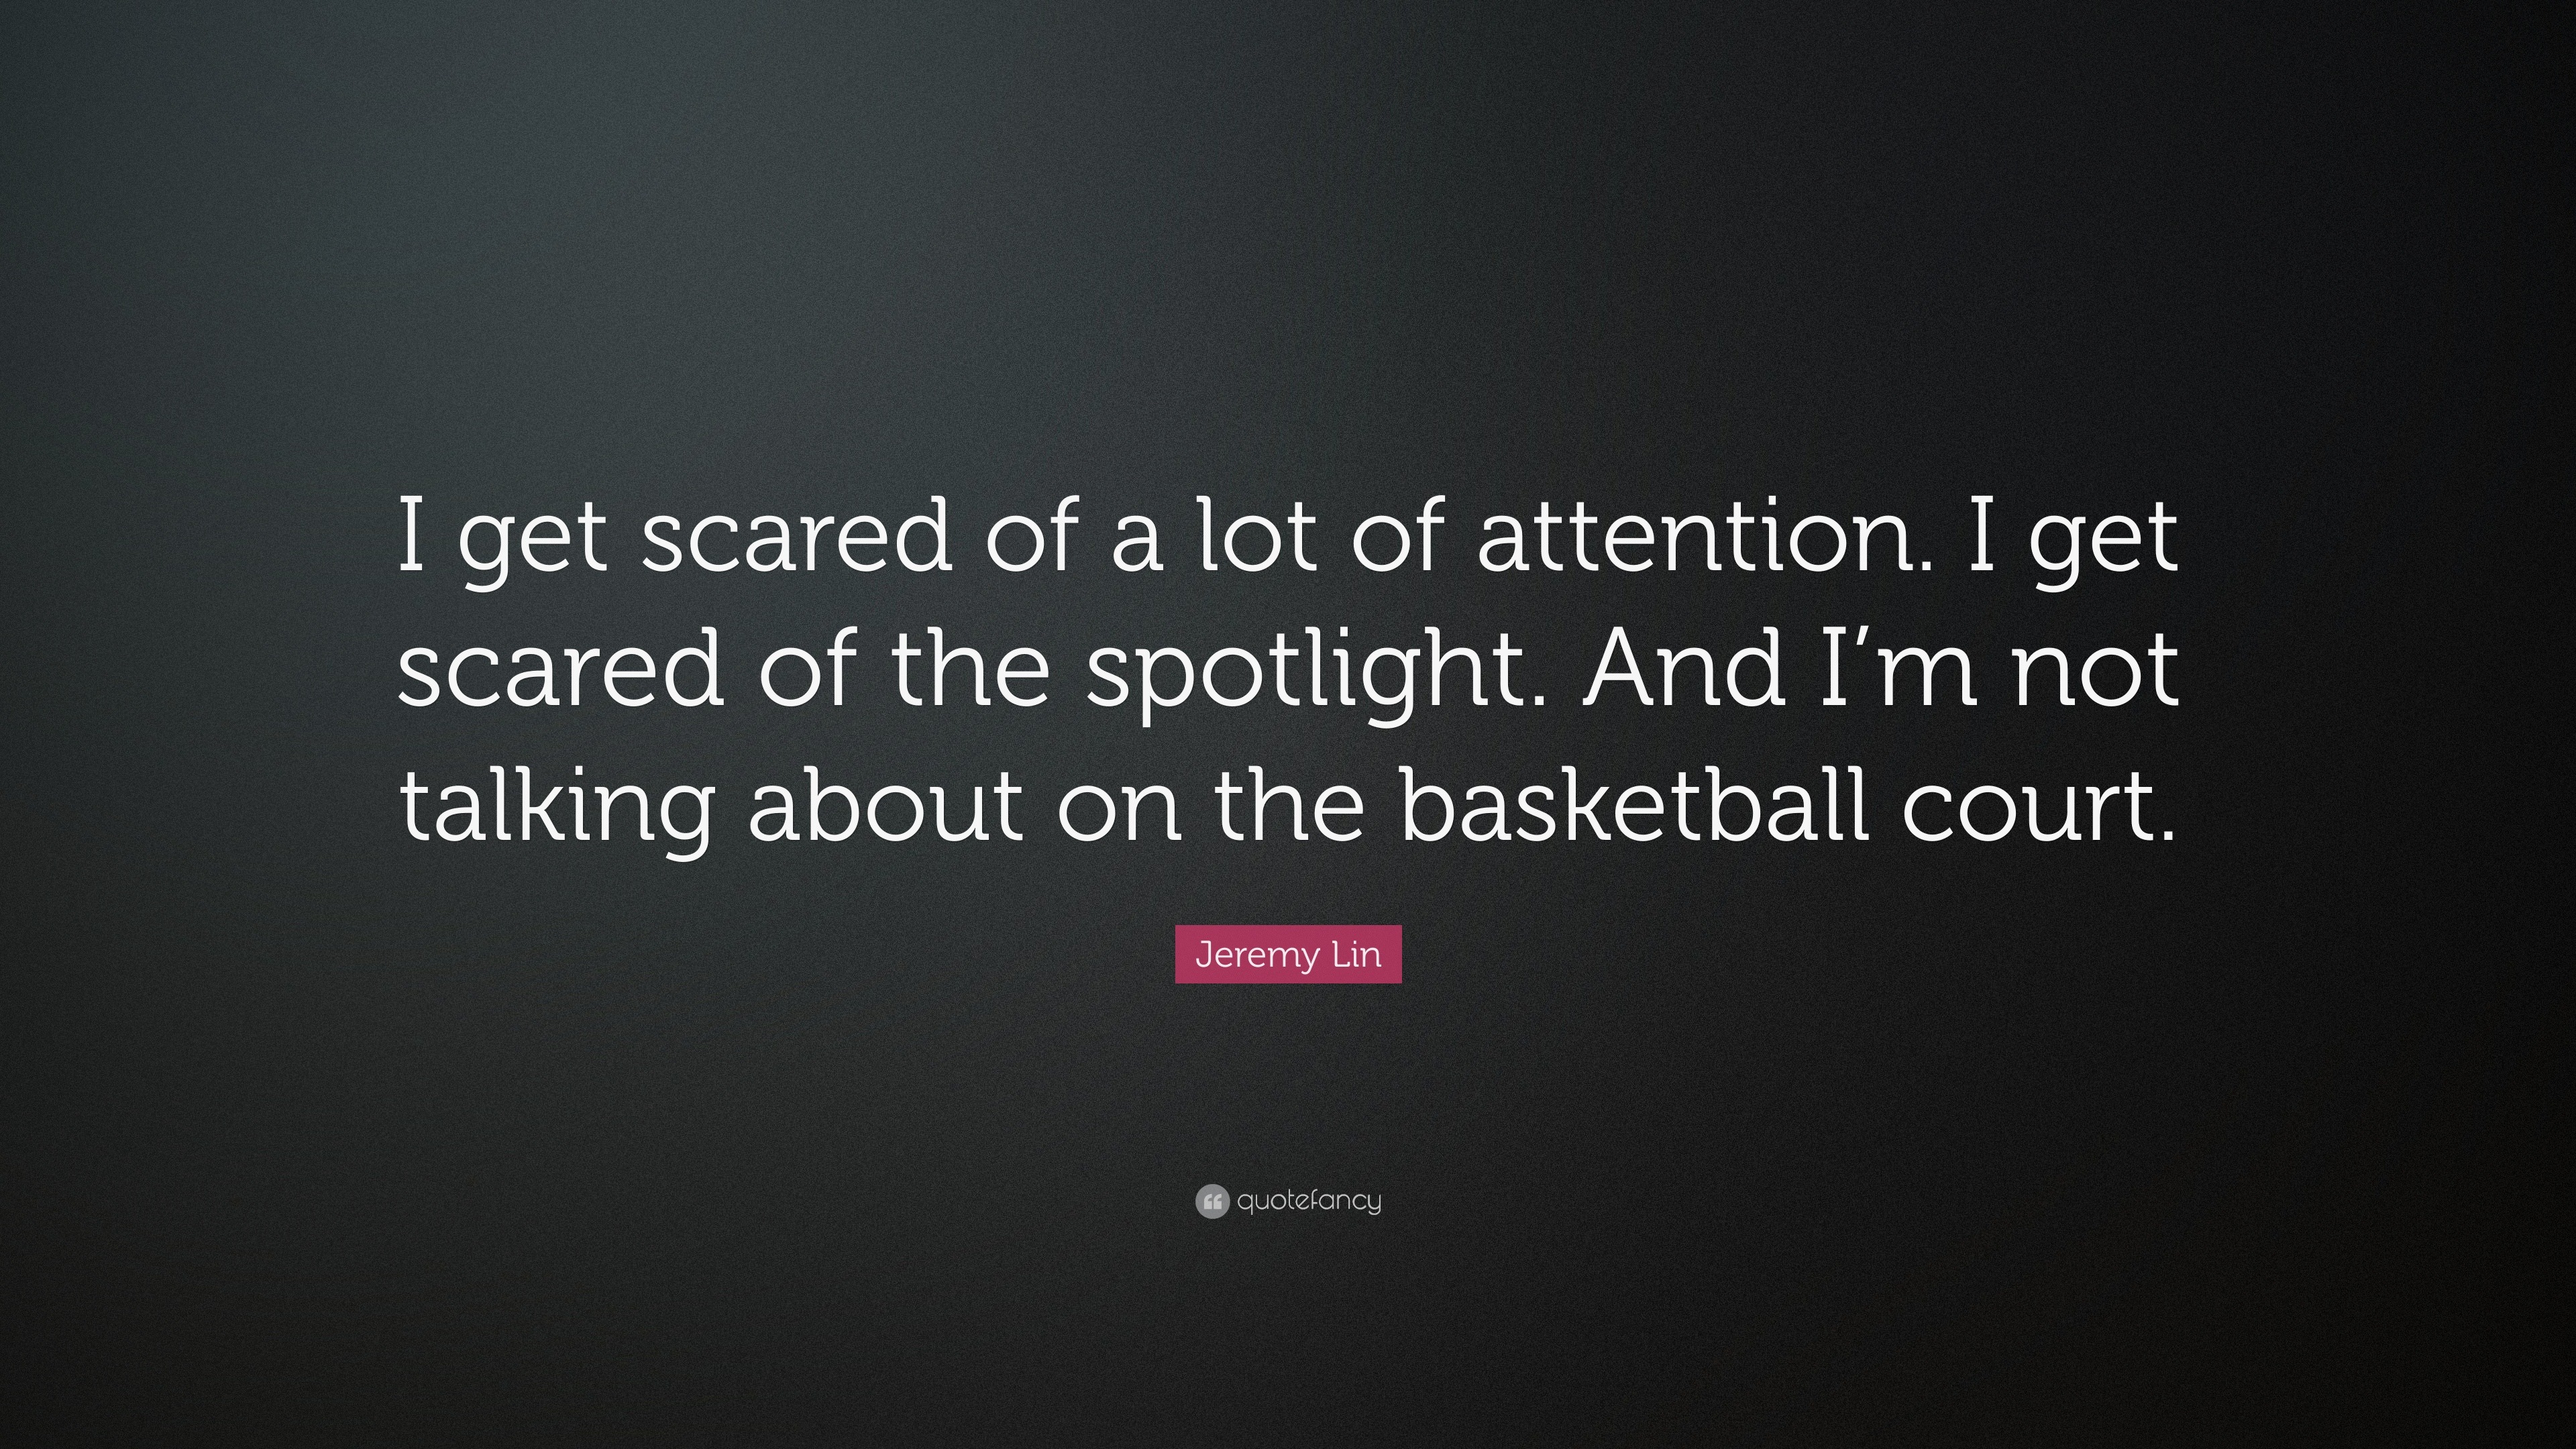 Jeremy Lin Quote: “I get scared of a lot of attention. I get scared of the